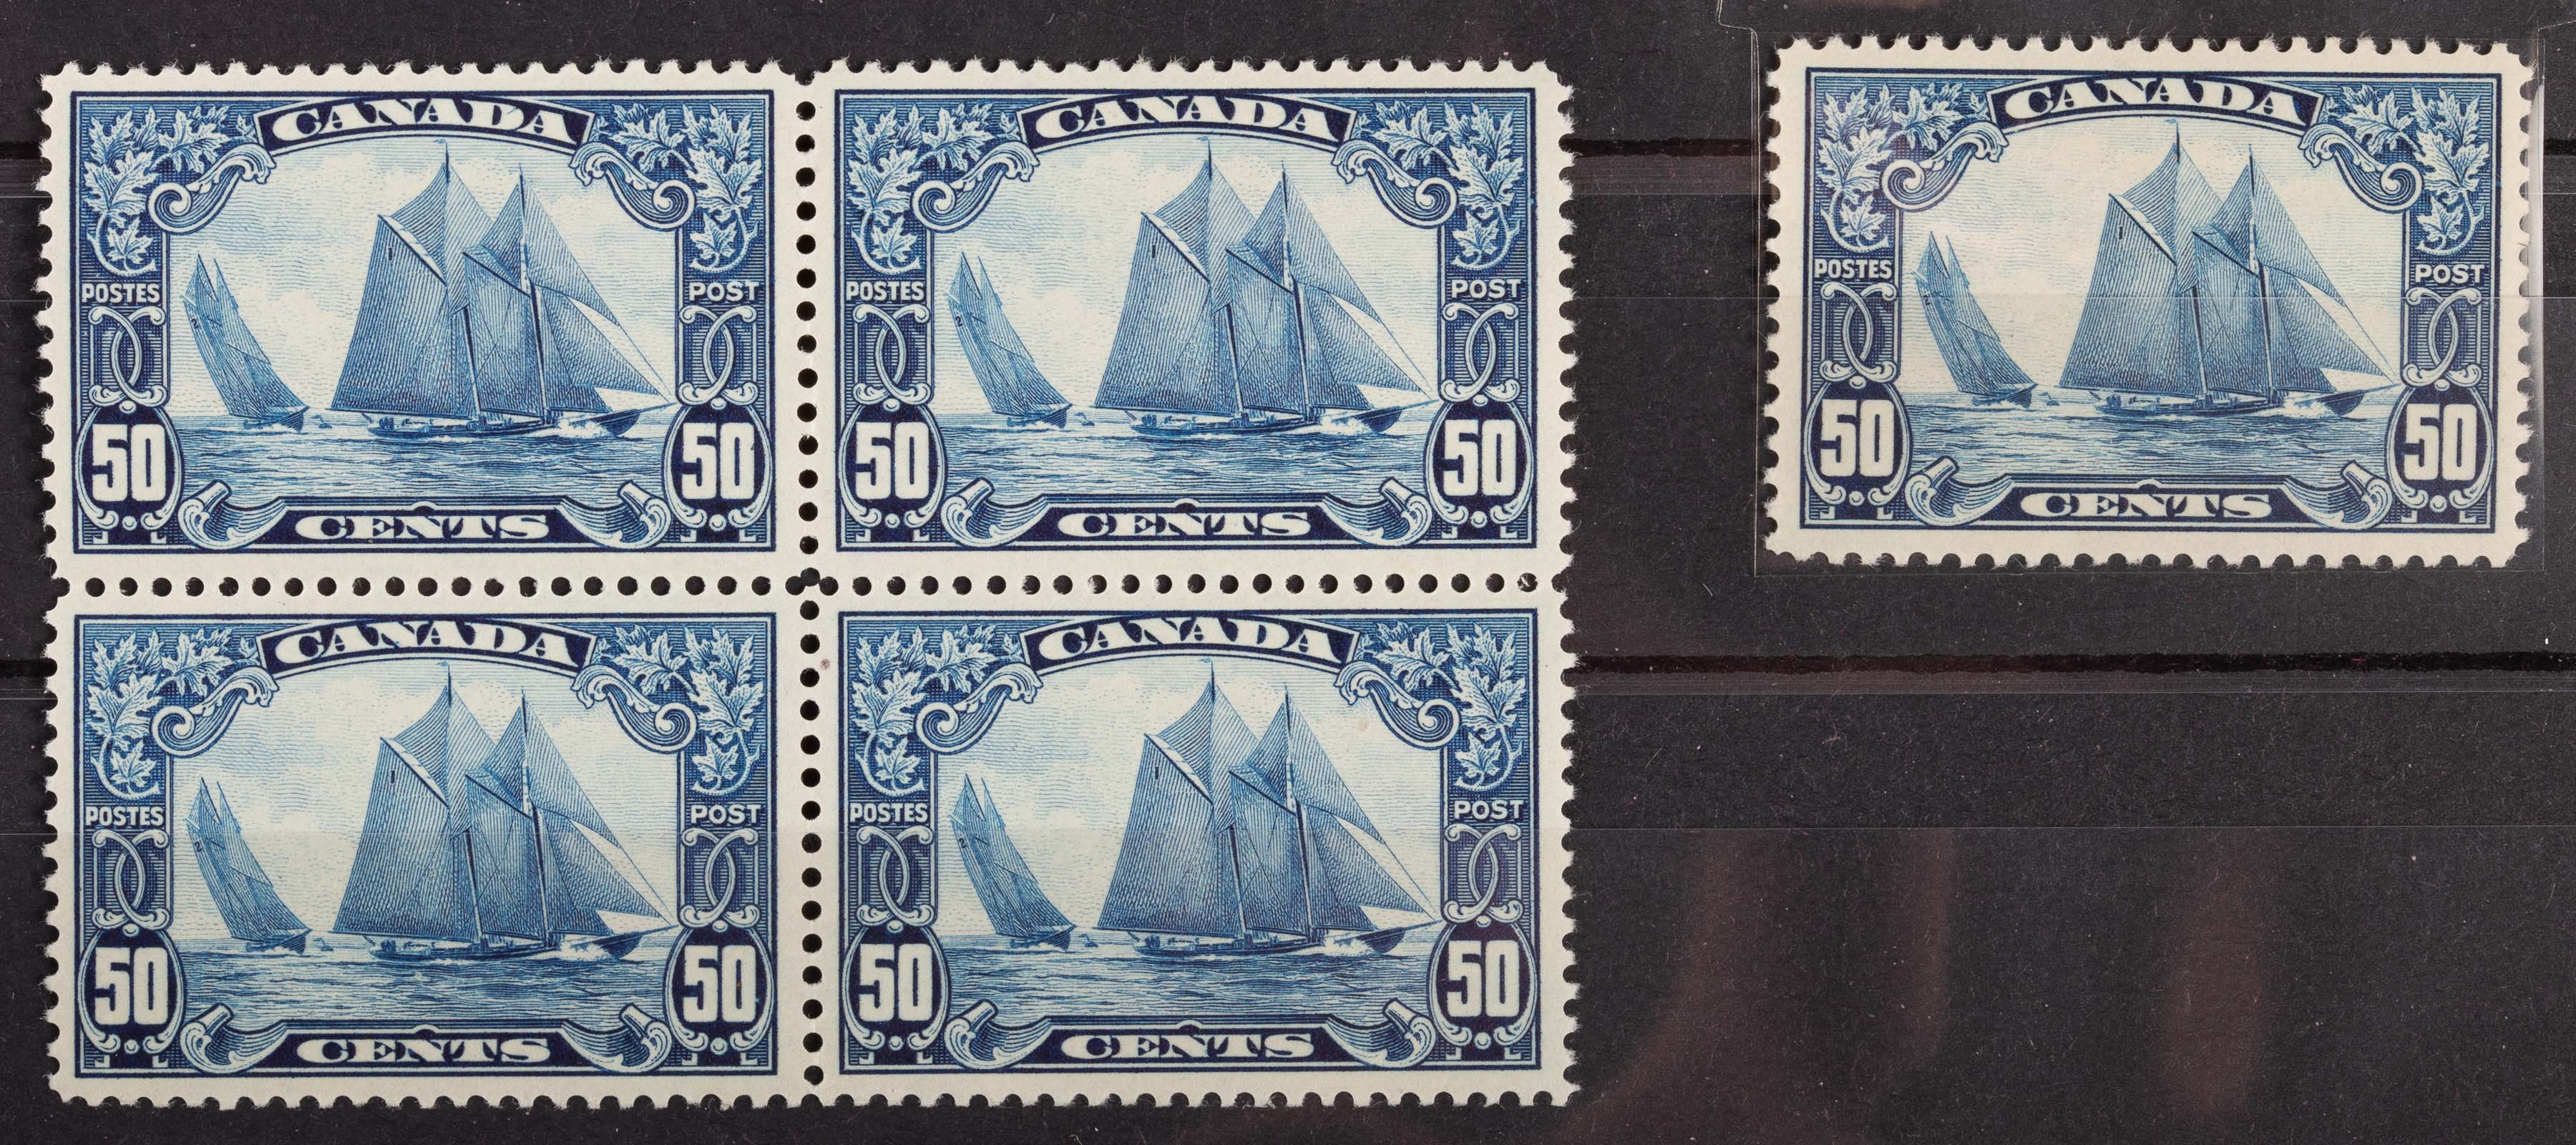 CANADA BLUENOSE POSTAGE STAMPS  338a0c